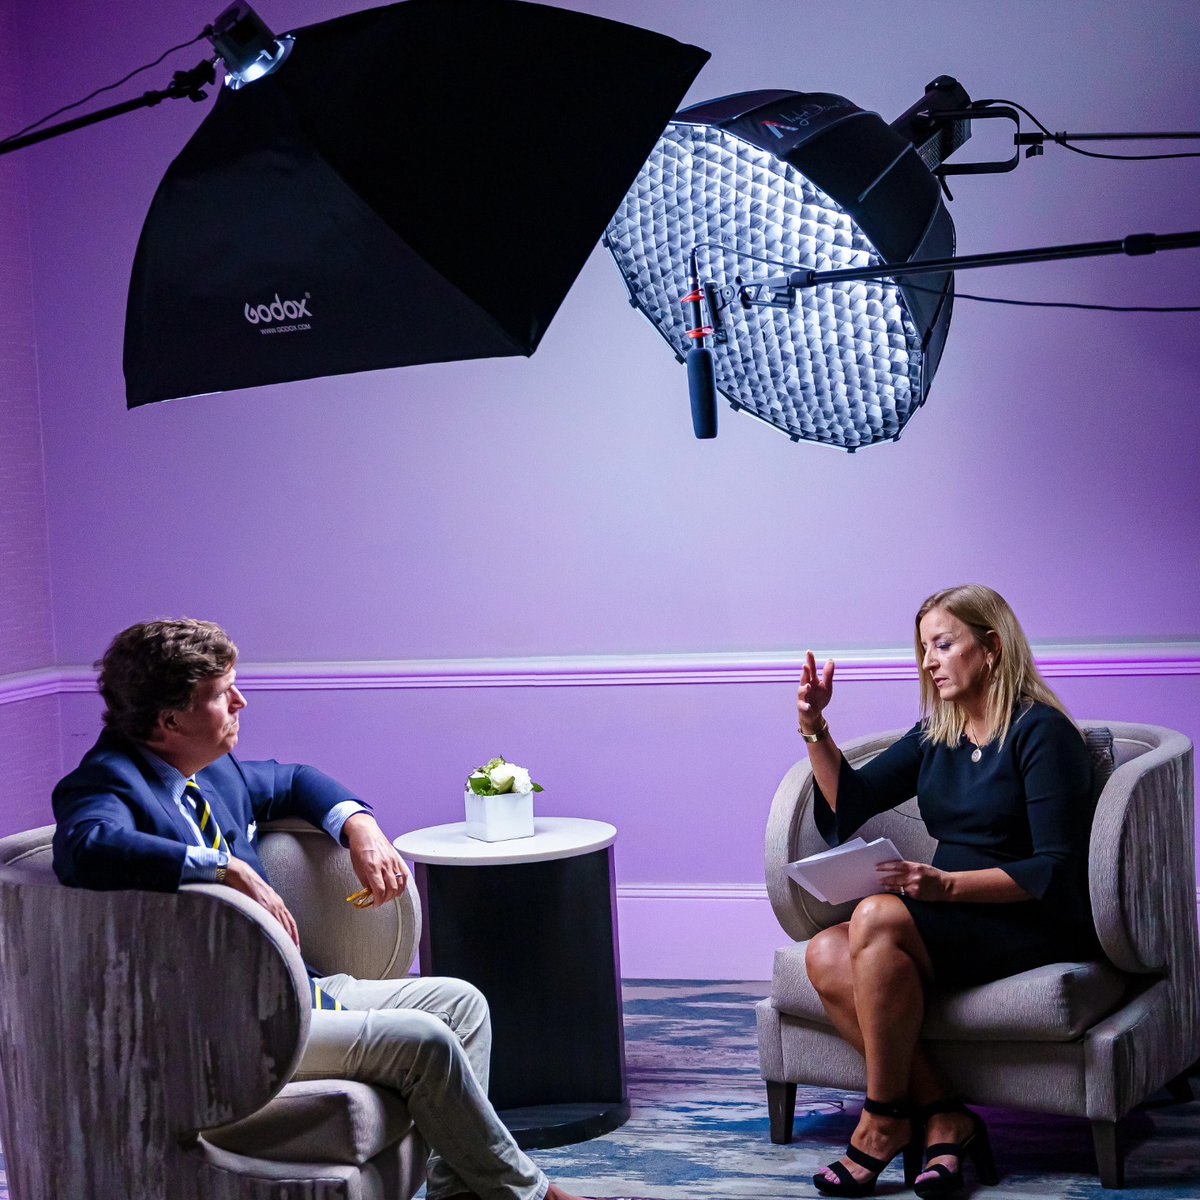 'Behind the Scenes' photos of the interview with @TuckerCarlson . The Podcast is dropping soon and you will love it! He was hilarious, inspiring, reflective and very real. Stay tuned! #momsforamerica #TuckerCarlson #Tucker